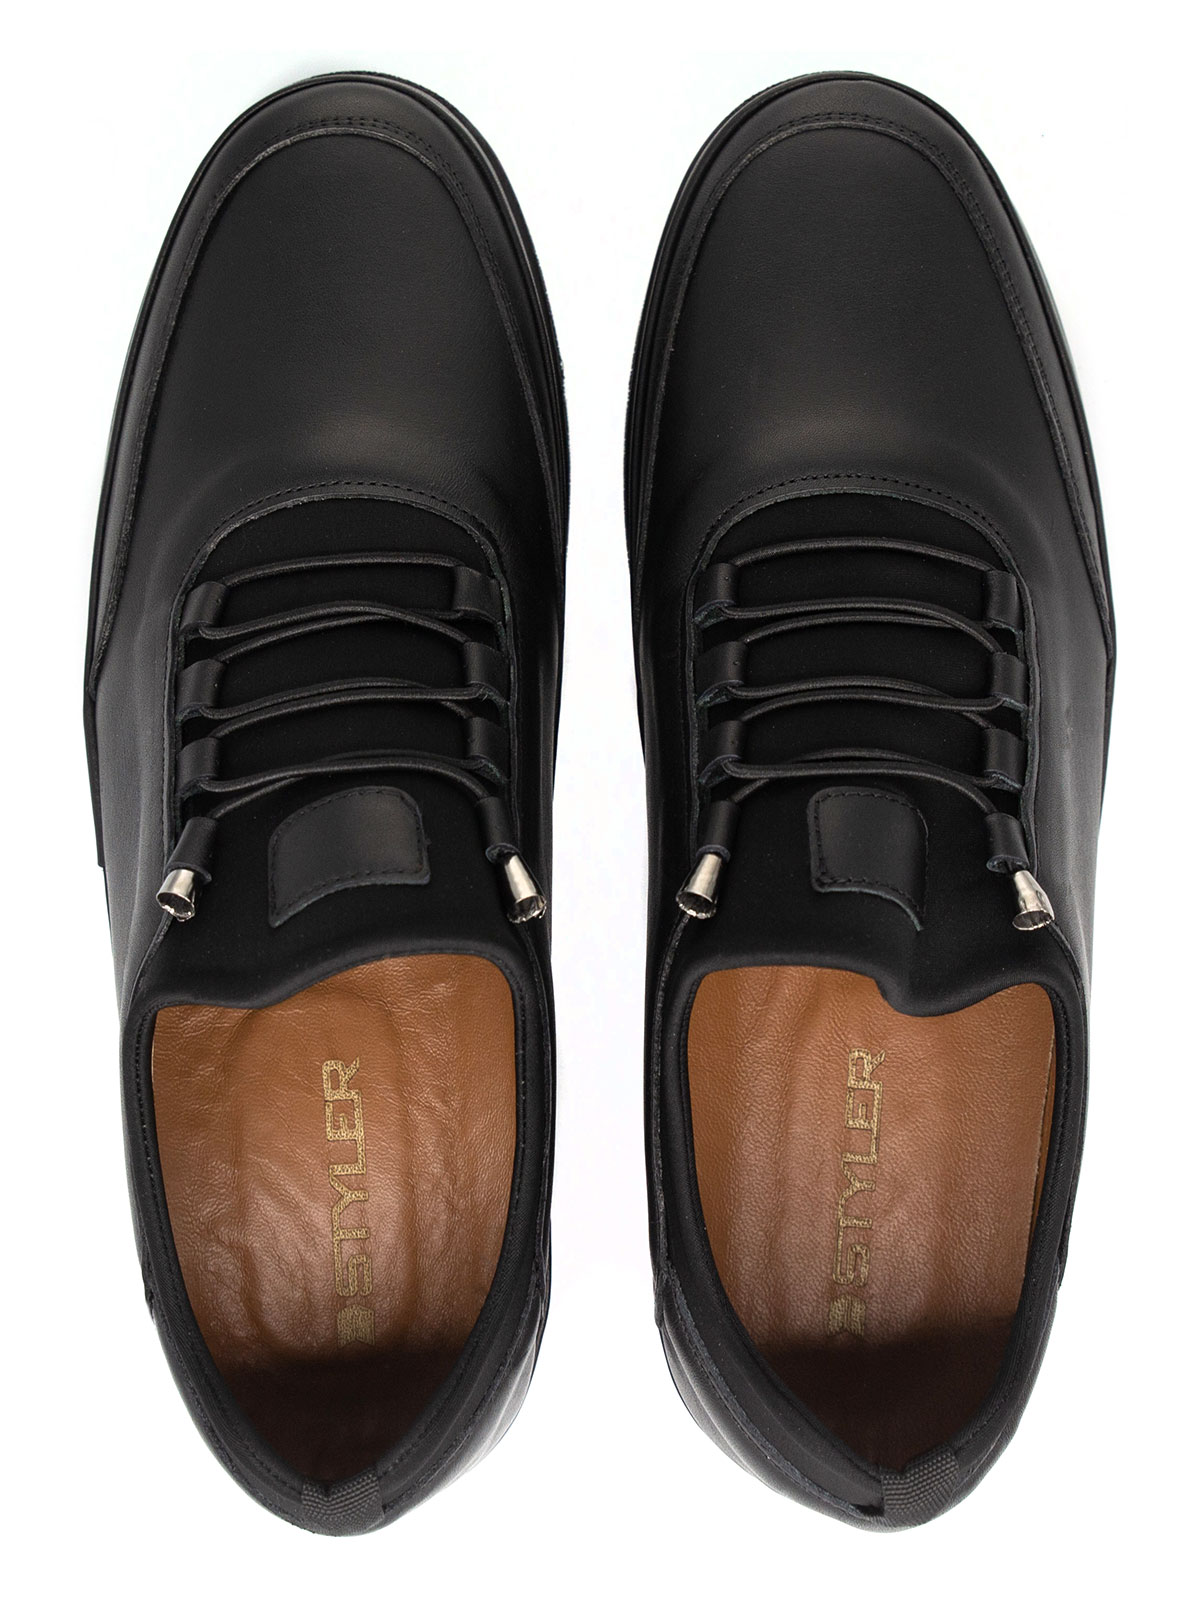 Black leather shoes with elastic laces - 81095 - € 41.62 img2